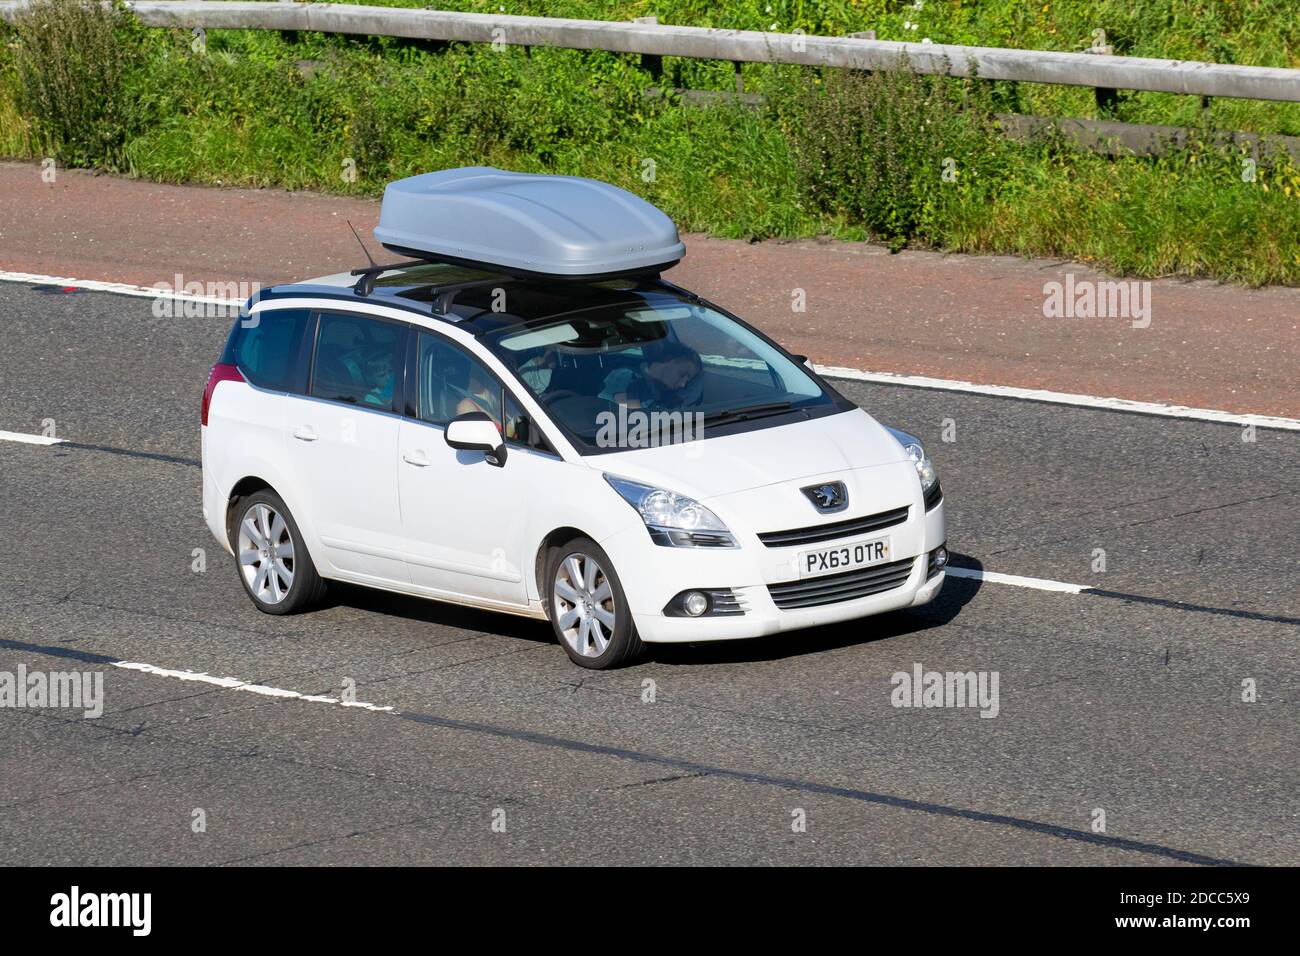 2003 white Peugeot 5008 Allure HDI with roof box; Vehicular traffic, moving vehicles, cars, vehicle driving on UK roads, motors, motoring on the M6 motorway highway UK road network. Stock Photo